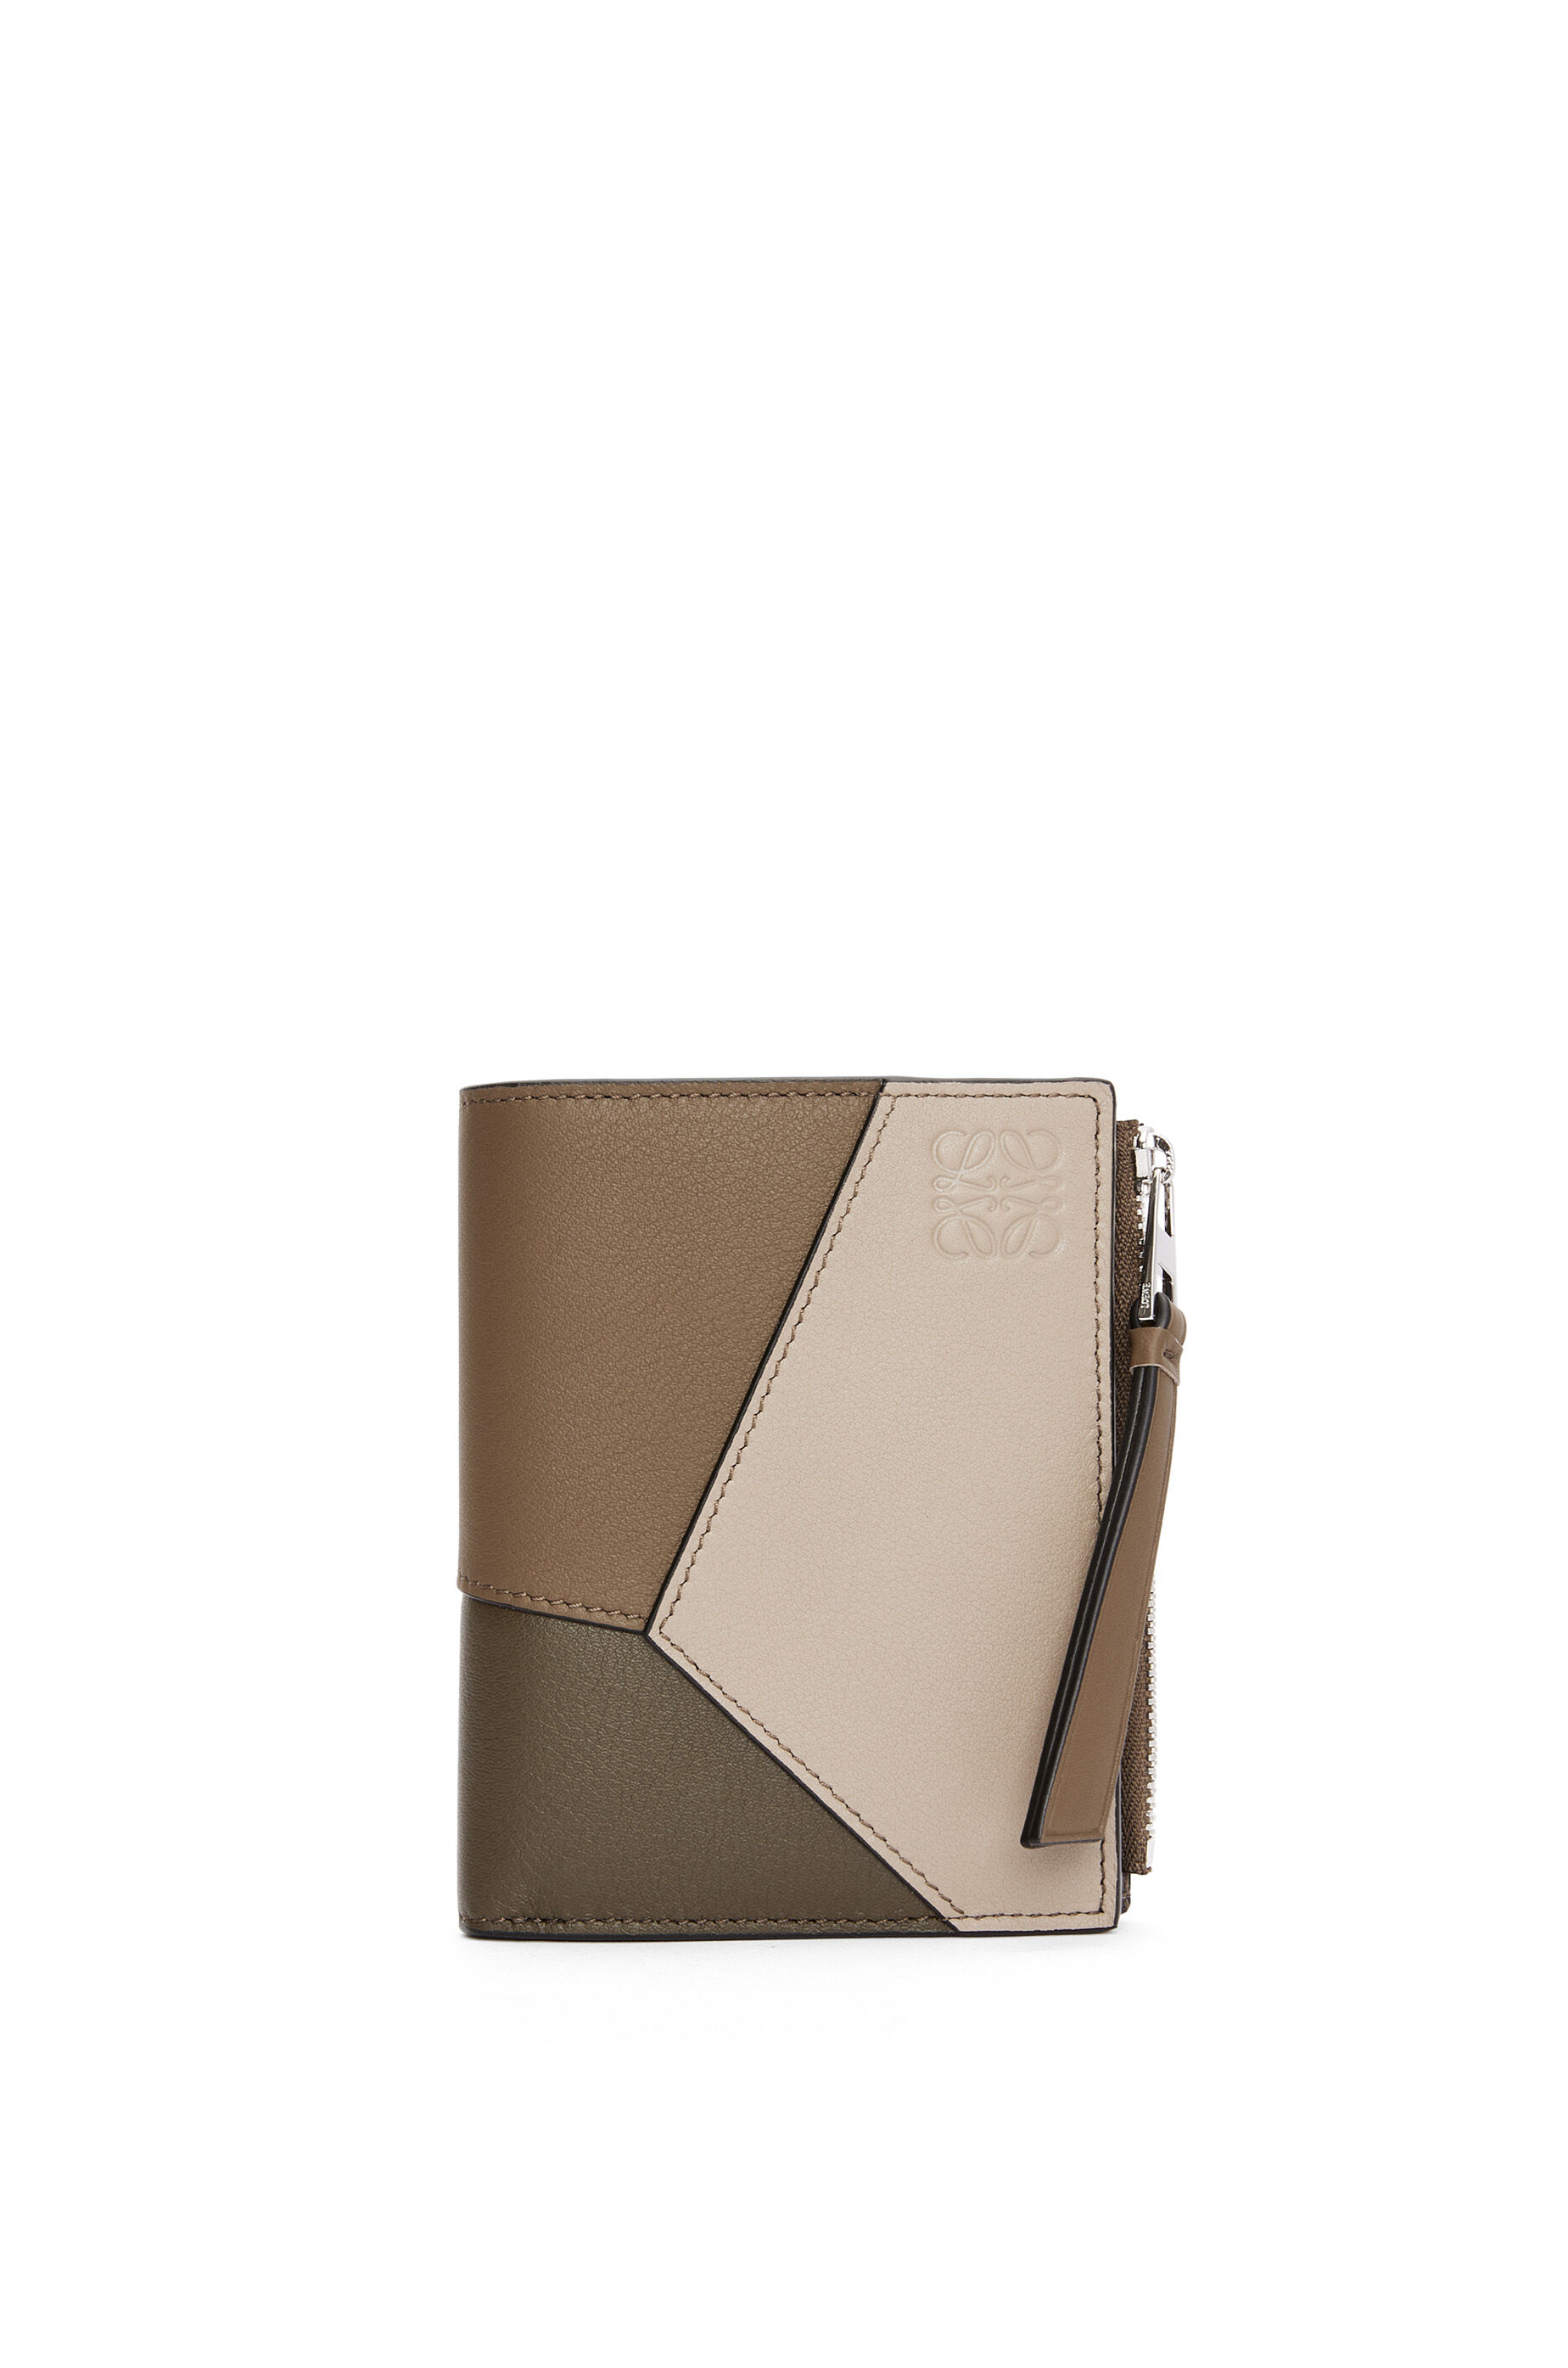 Puzzle slim compact wallet in classic calfskin